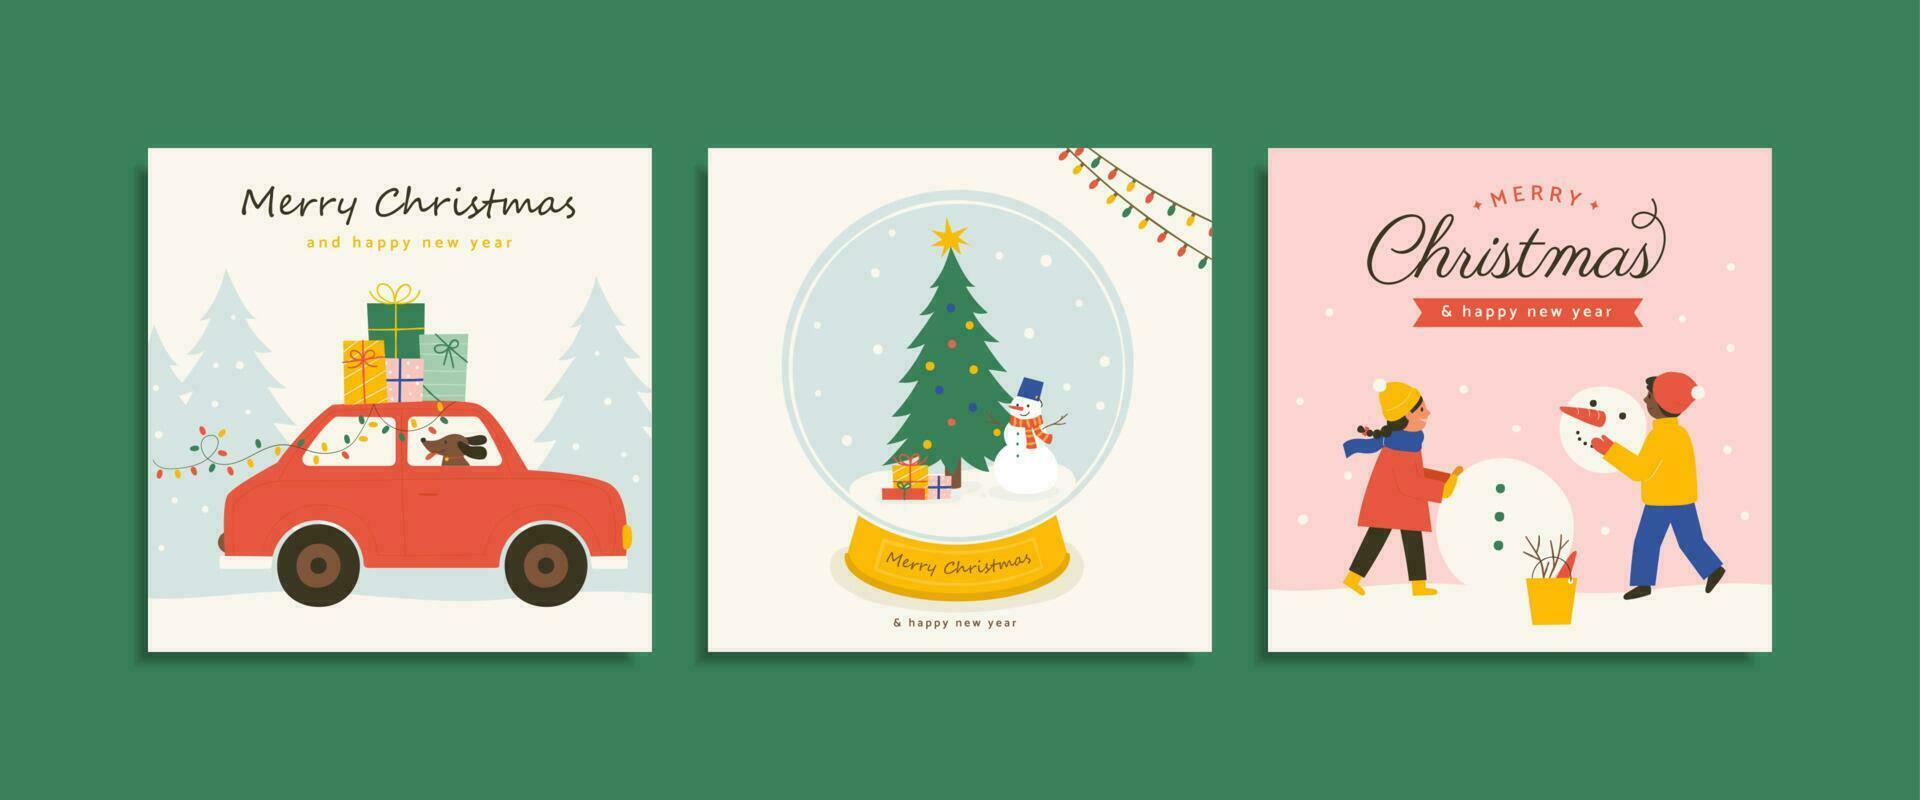 Set of Christmas card templates on green background. Flat illustration of road trip, Christmas tree in snow globe, and kids making a snowman. Suitable for invitation and greeting card. vector